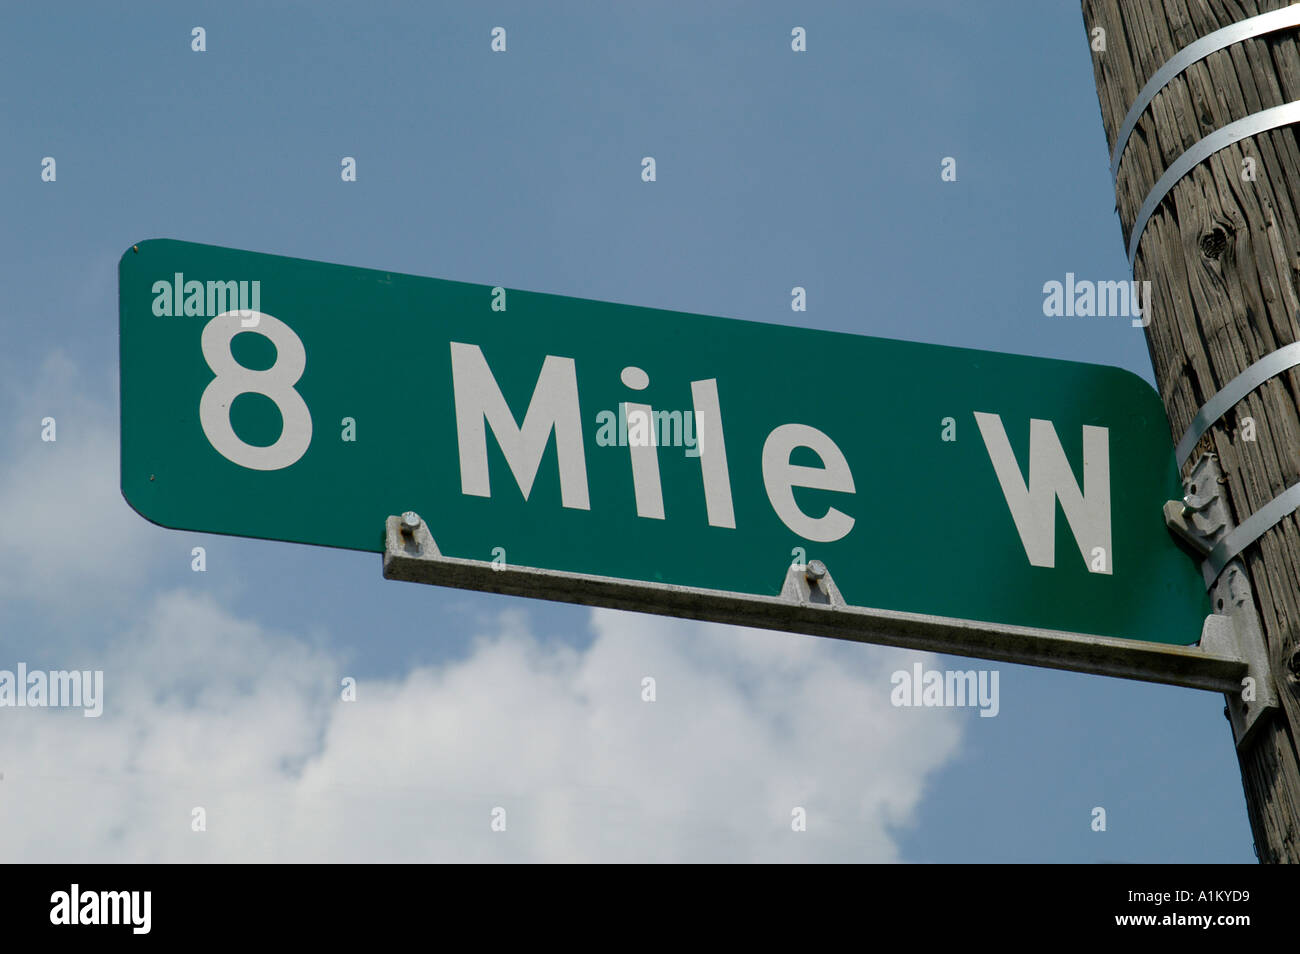 Street sign for 8 Mile Rd in Detroit Michigan USA  Stock Photo